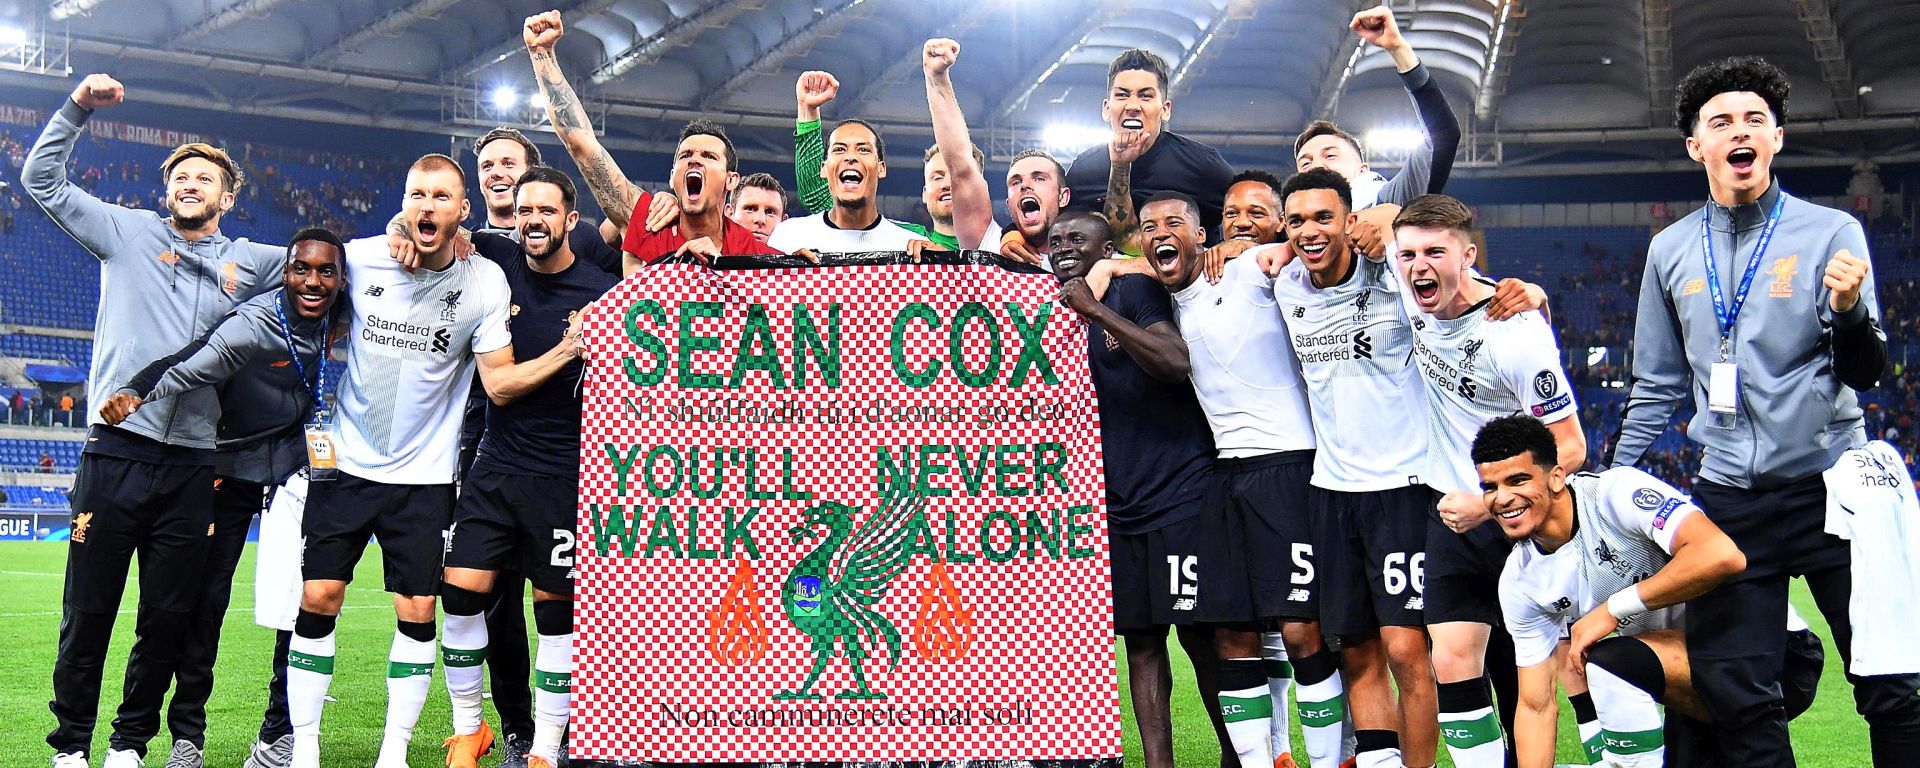 epa06707627 Liverpool players celebrate with a banner supporting Liverpool fan Sean Cox who was severly injured during clashes ahead of the first leg match during the UEFA Champions League semi final, second leg soccer match between AS Roma and Liverpool FC at the Olimpico stadium in Rome, Italy, 02 May 2018. Liverpool won 7-6 on aggregate.  EPA/ETTORE FERRARI